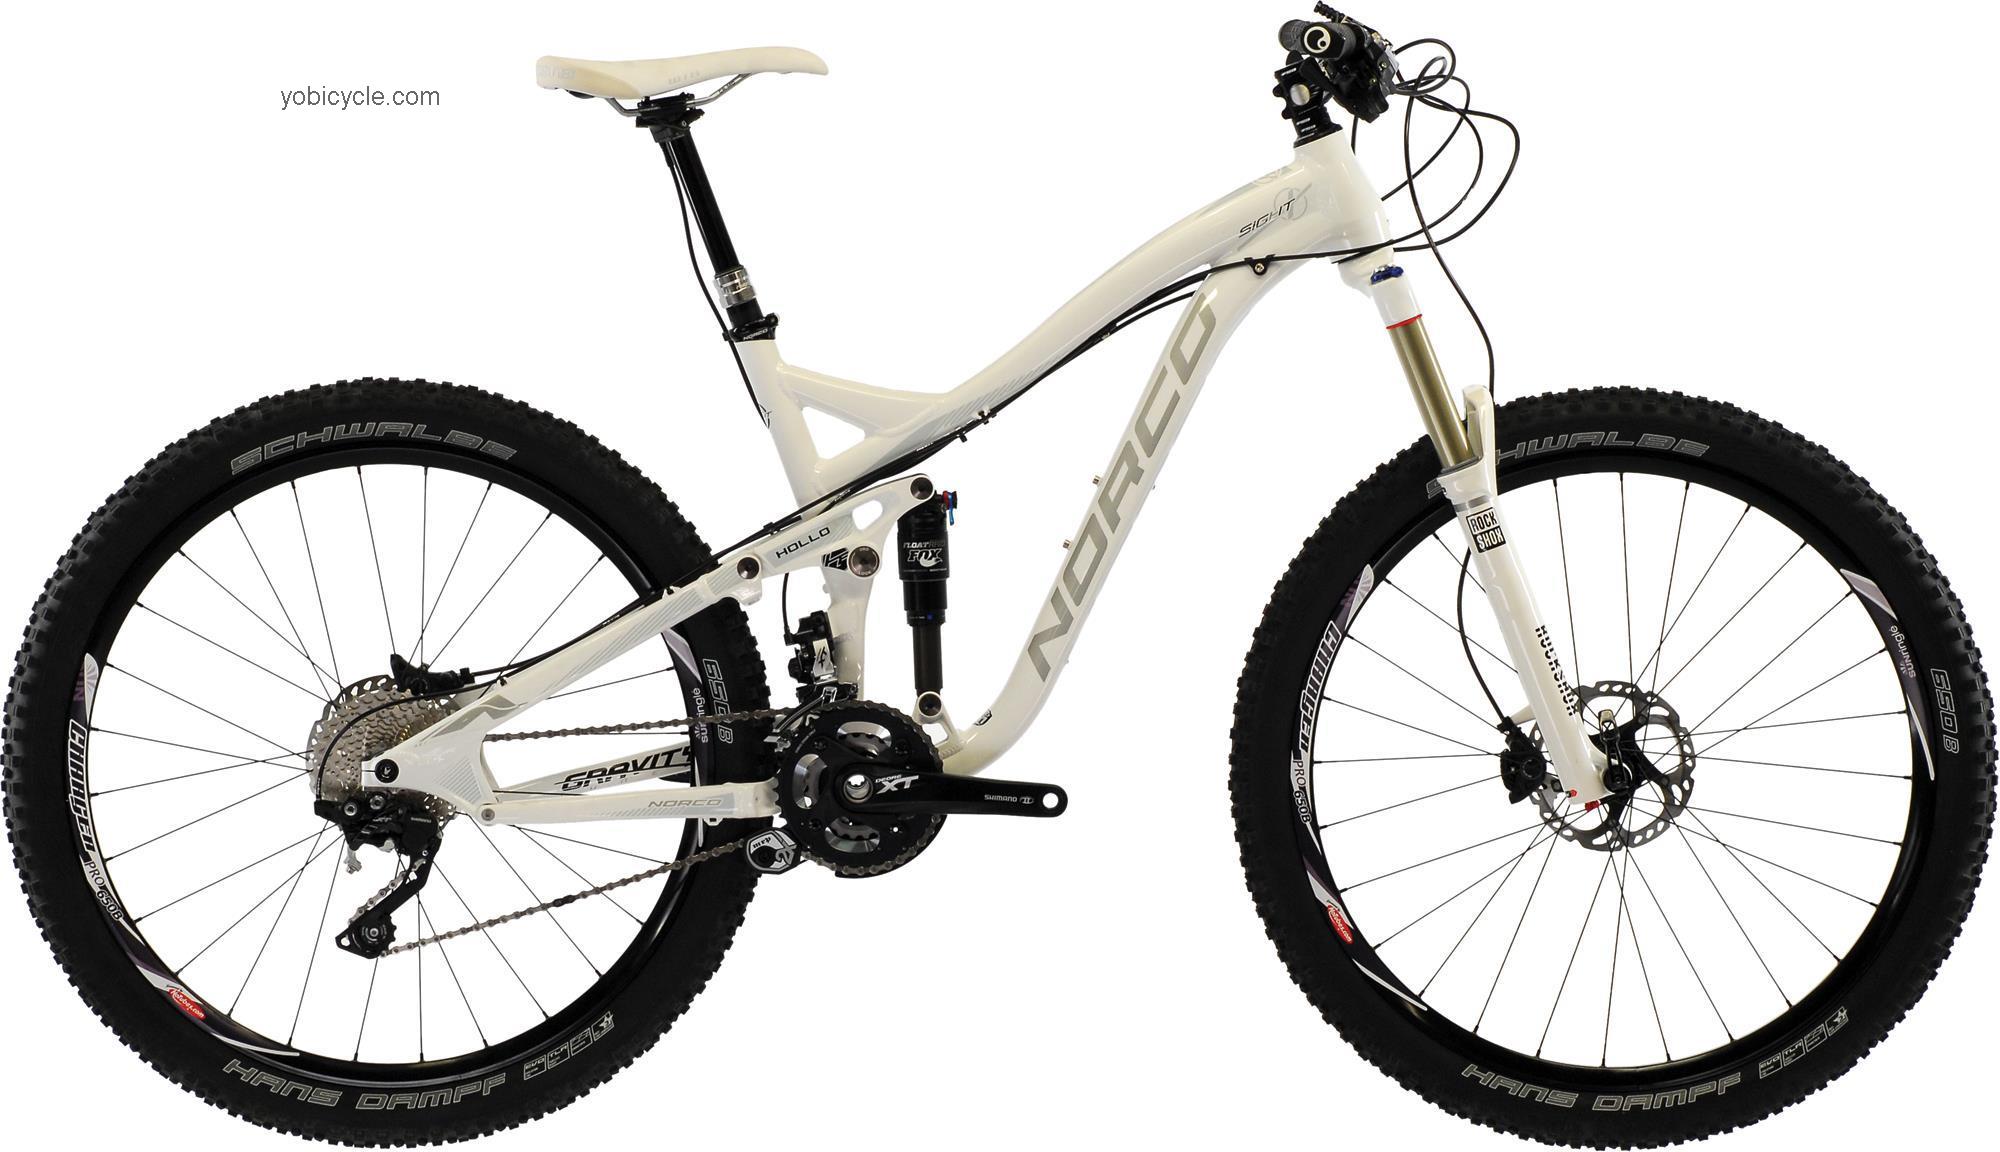 Norco Sight Killer B-1 2013 comparison online with competitors